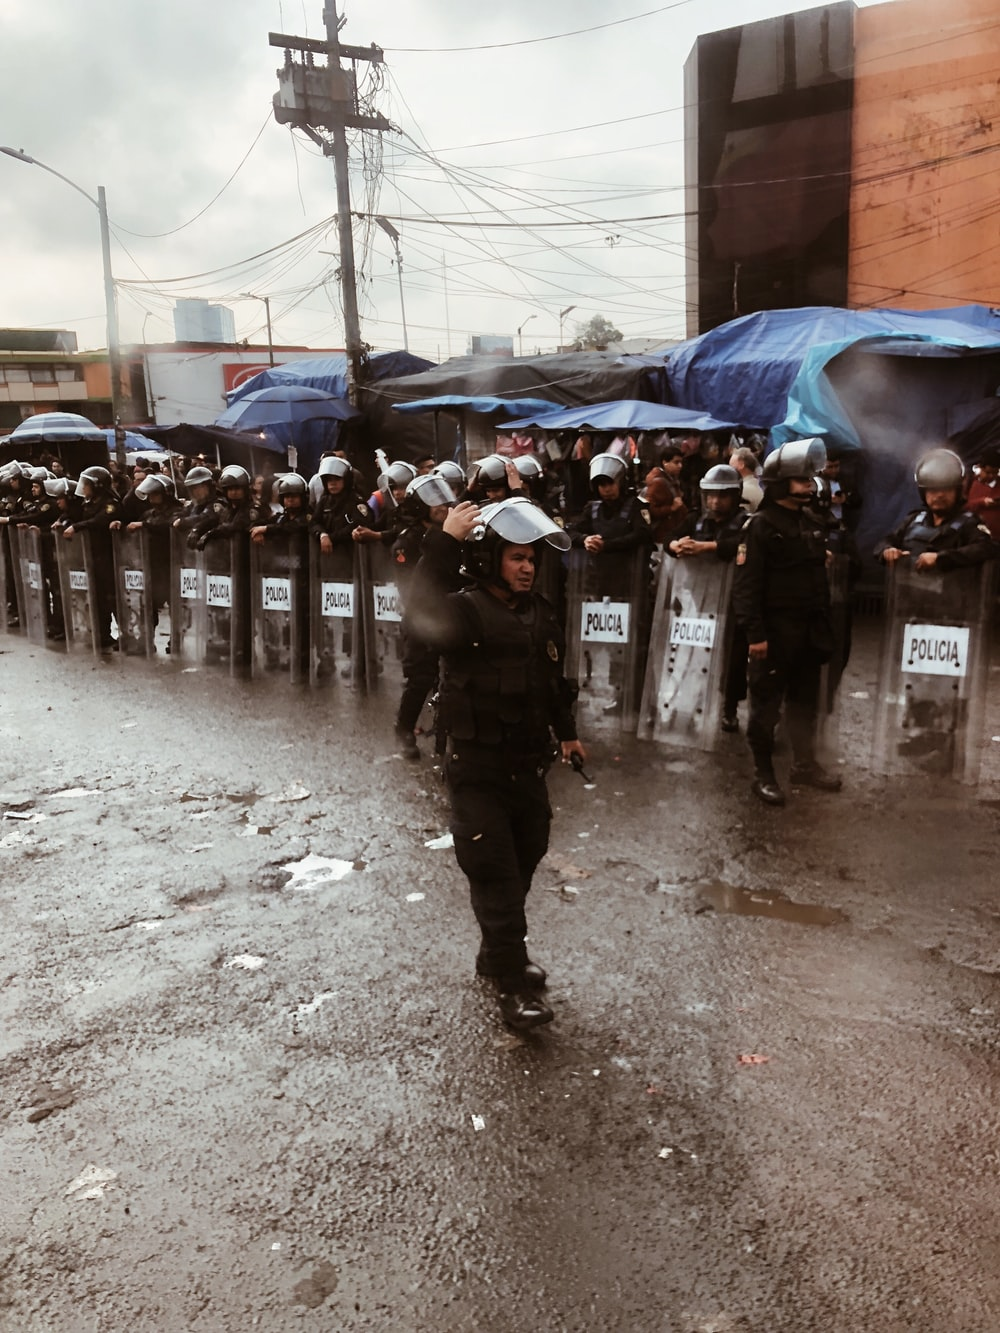 Police officers in Mexico